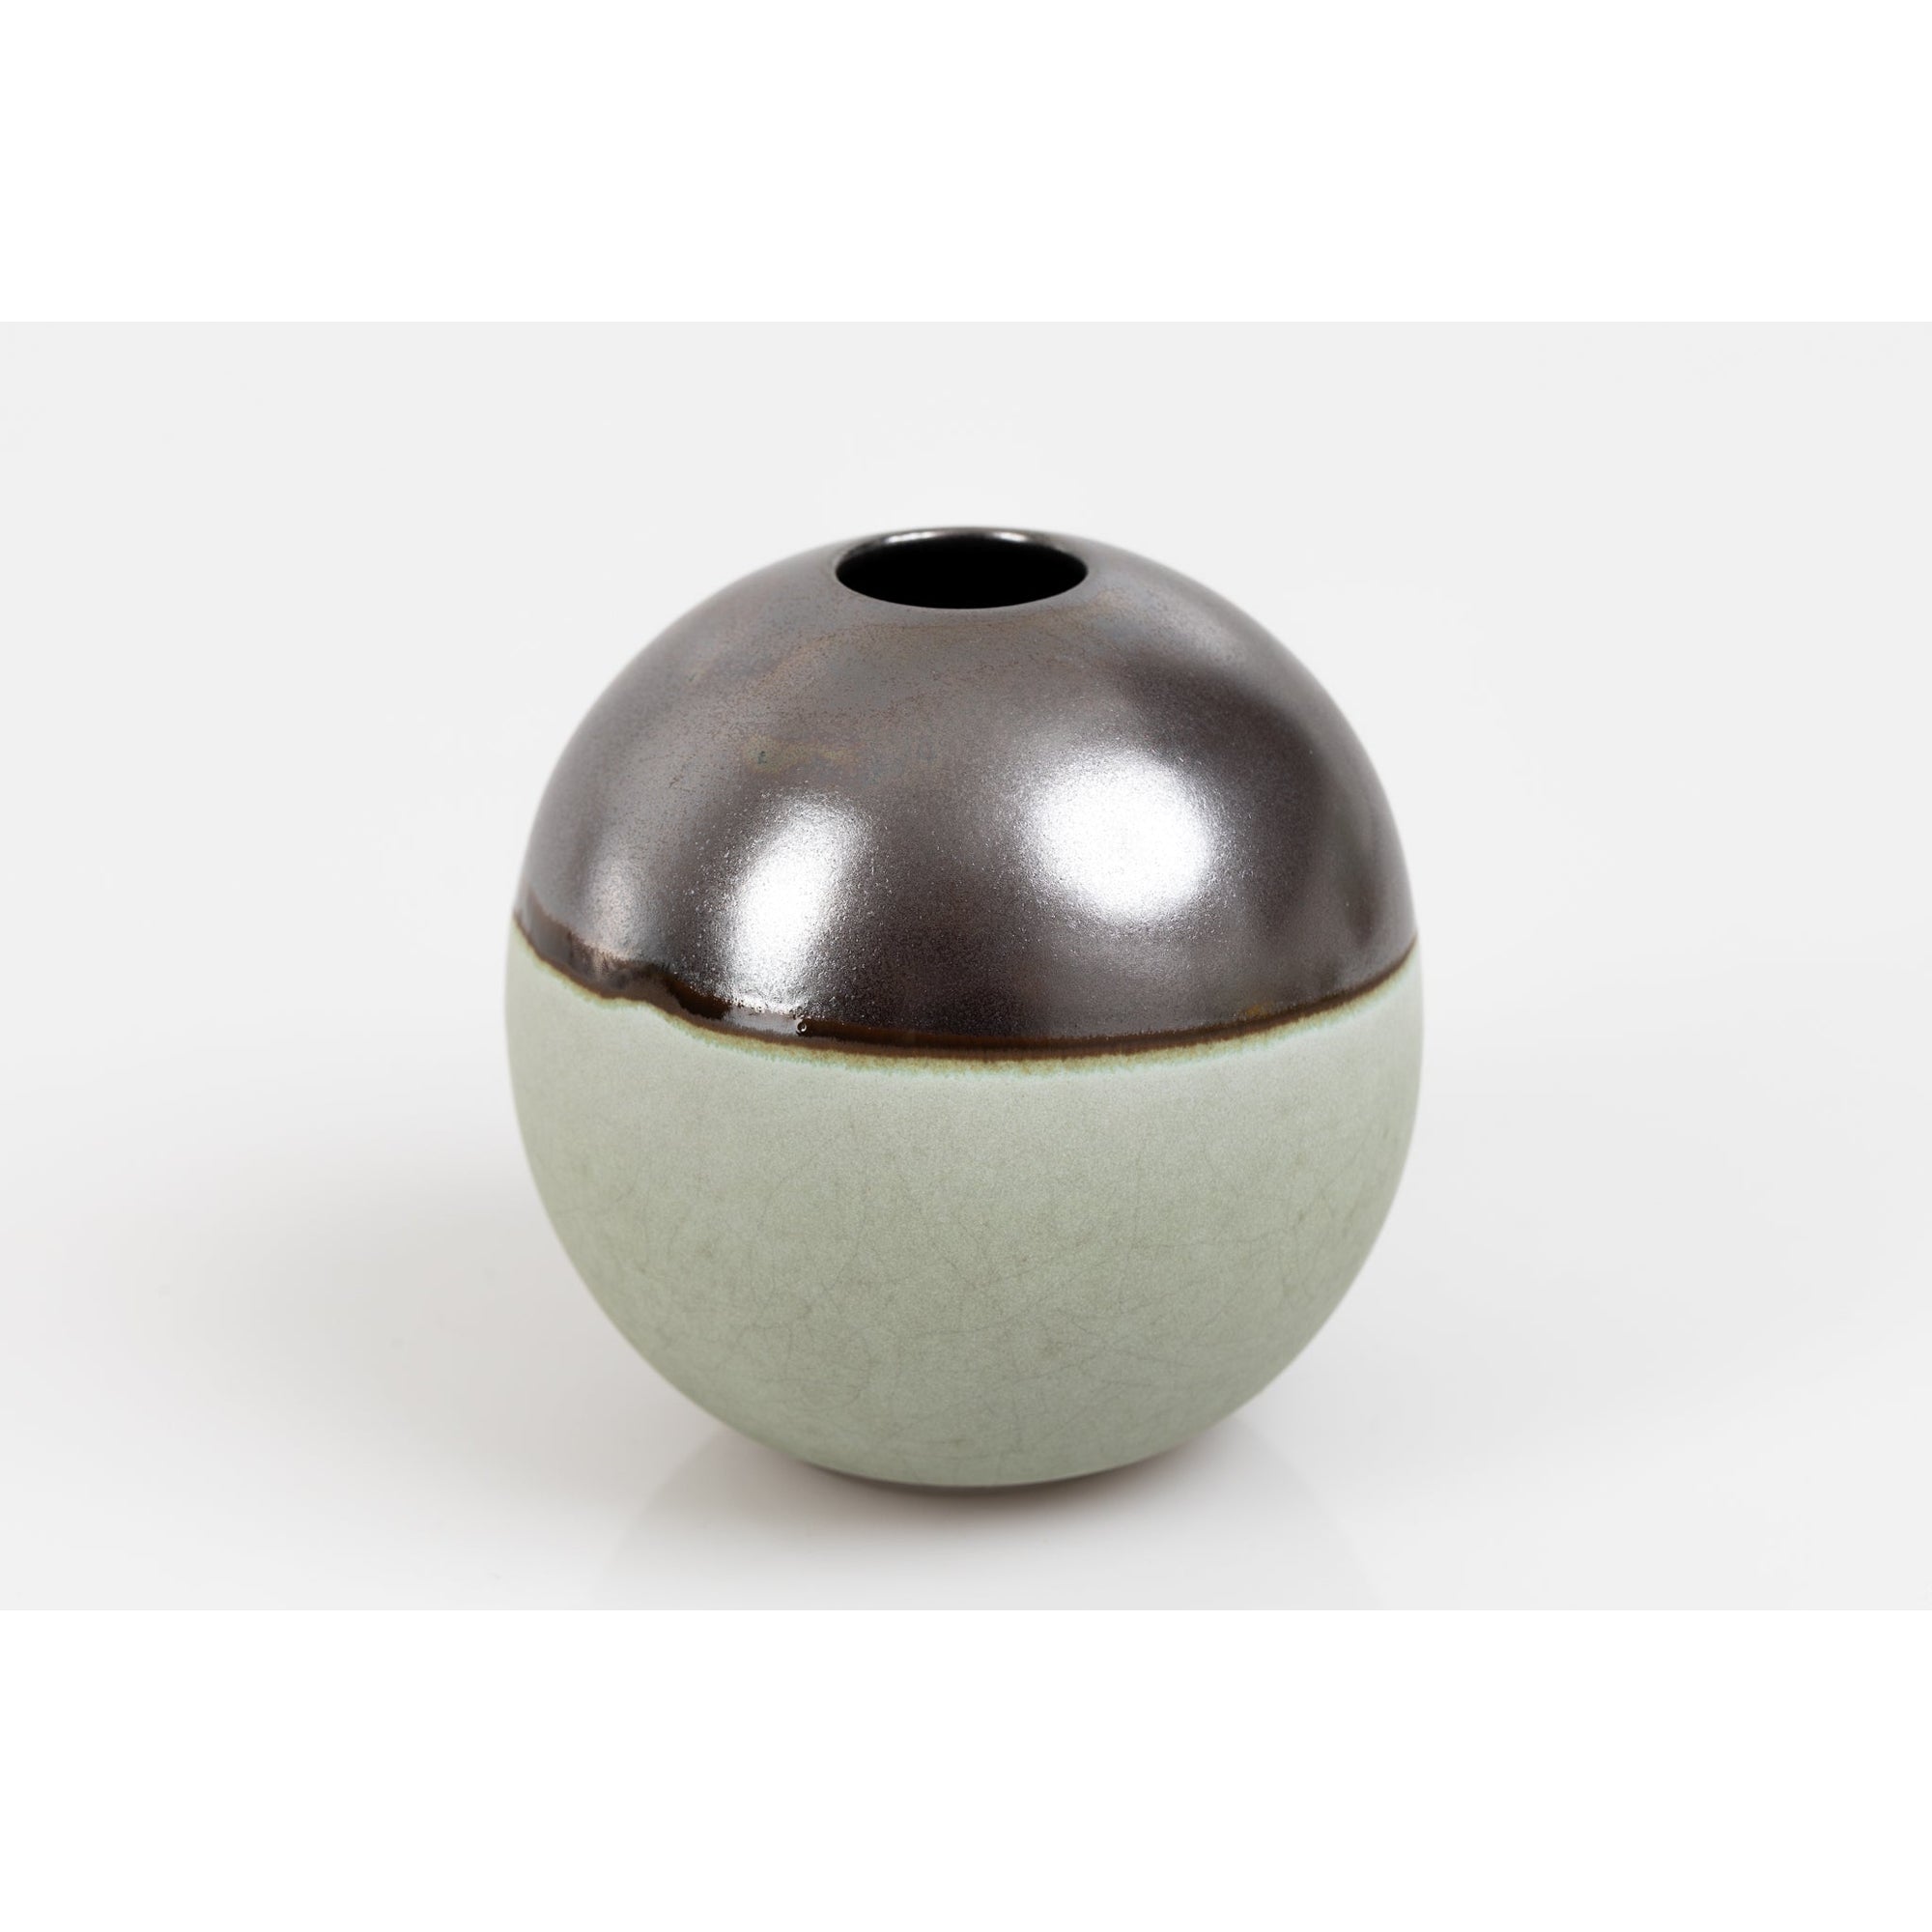 KSG1 Lunar, Stoneware Vase by Kate Schuricht, available at Padstow Gallery, Cornwall